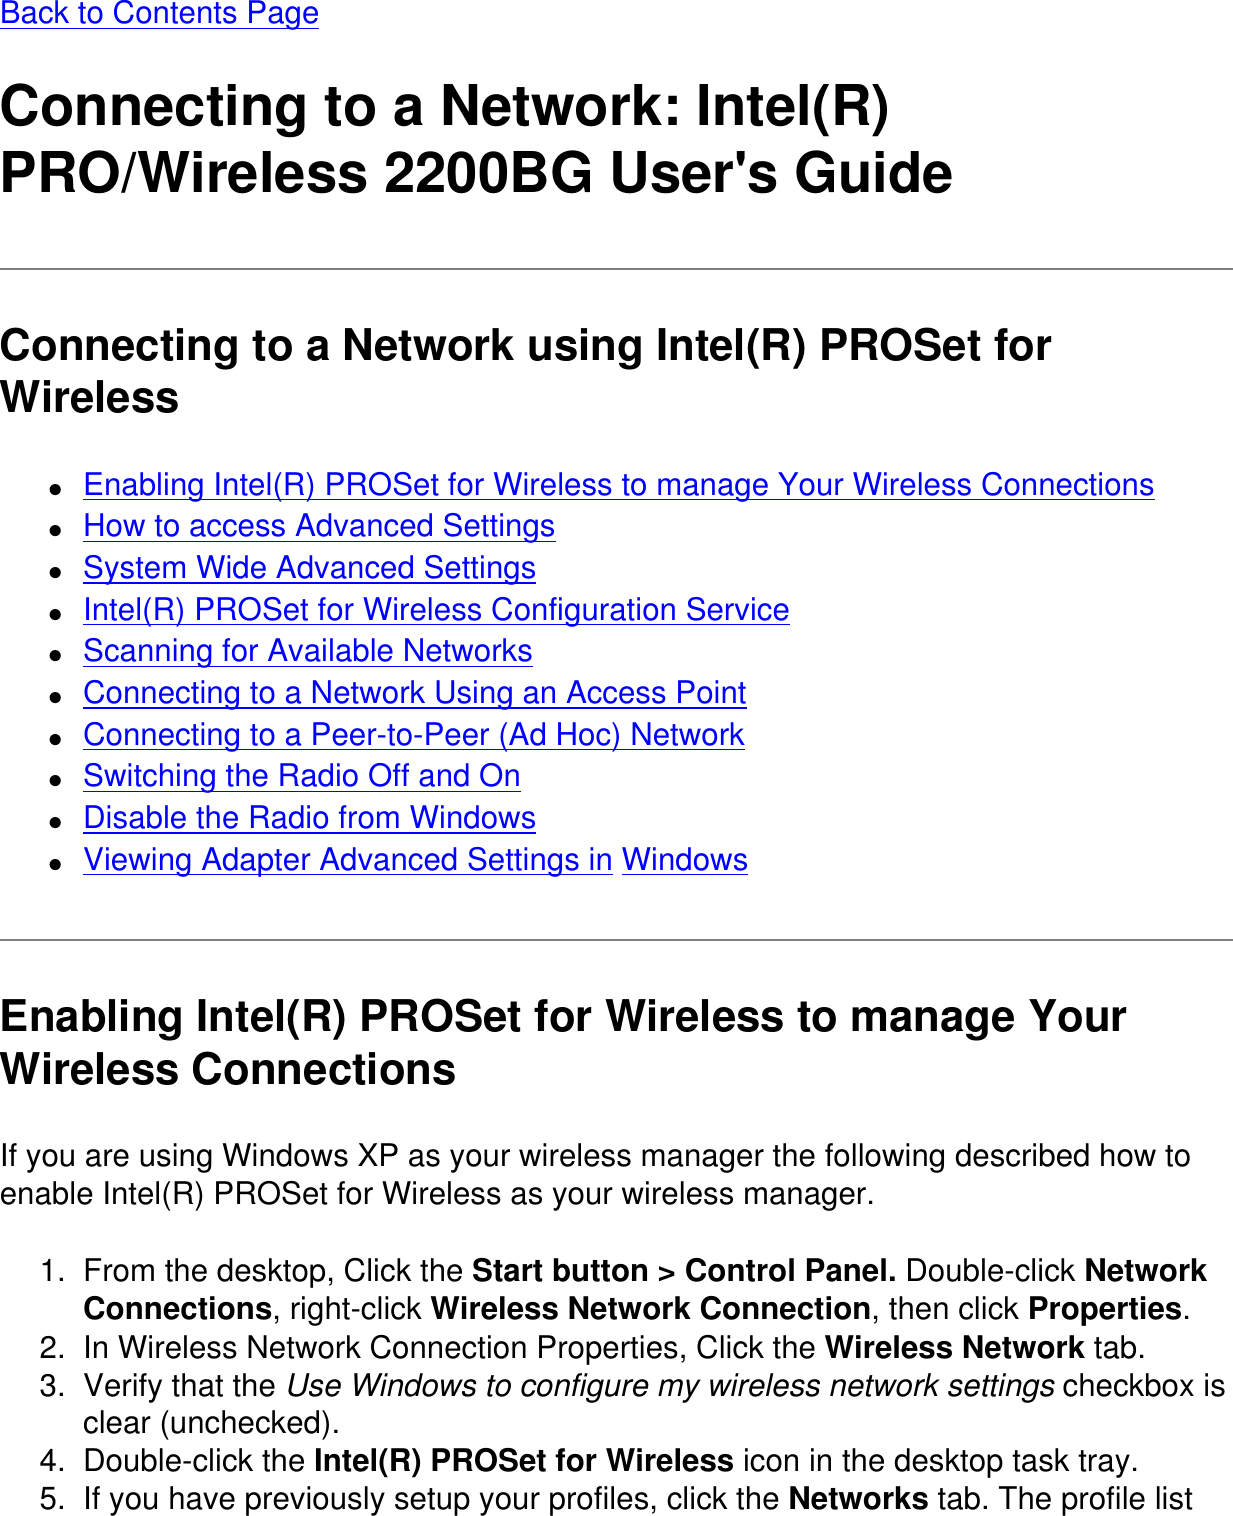 Back to Contents PageConnecting to a Network: Intel(R) PRO/Wireless 2200BG User&apos;s GuideConnecting to a Network using Intel(R) PROSet for Wireless●     Enabling Intel(R) PROSet for Wireless to manage Your Wireless Connections●     How to access Advanced Settings●     System Wide Advanced Settings●     Intel(R) PROSet for Wireless Configuration Service●     Scanning for Available Networks●     Connecting to a Network Using an Access Point●     Connecting to a Peer-to-Peer (Ad Hoc) Network●     Switching the Radio Off and On●     Disable the Radio from Windows●     Viewing Adapter Advanced Settings in WindowsEnabling Intel(R) PROSet for Wireless to manage Your Wireless ConnectionsIf you are using Windows XP as your wireless manager the following described how to enable Intel(R) PROSet for Wireless as your wireless manager.1.  From the desktop, Click the Start button &gt; Control Panel. Double-click Network Connections, right-click Wireless Network Connection, then click Properties.2.  In Wireless Network Connection Properties, Click the Wireless Network tab.3.  Verify that the Use Windows to configure my wireless network settings checkbox is clear (unchecked).4.  Double-click the Intel(R) PROSet for Wireless icon in the desktop task tray.5.  If you have previously setup your profiles, click the Networks tab. The profile list 